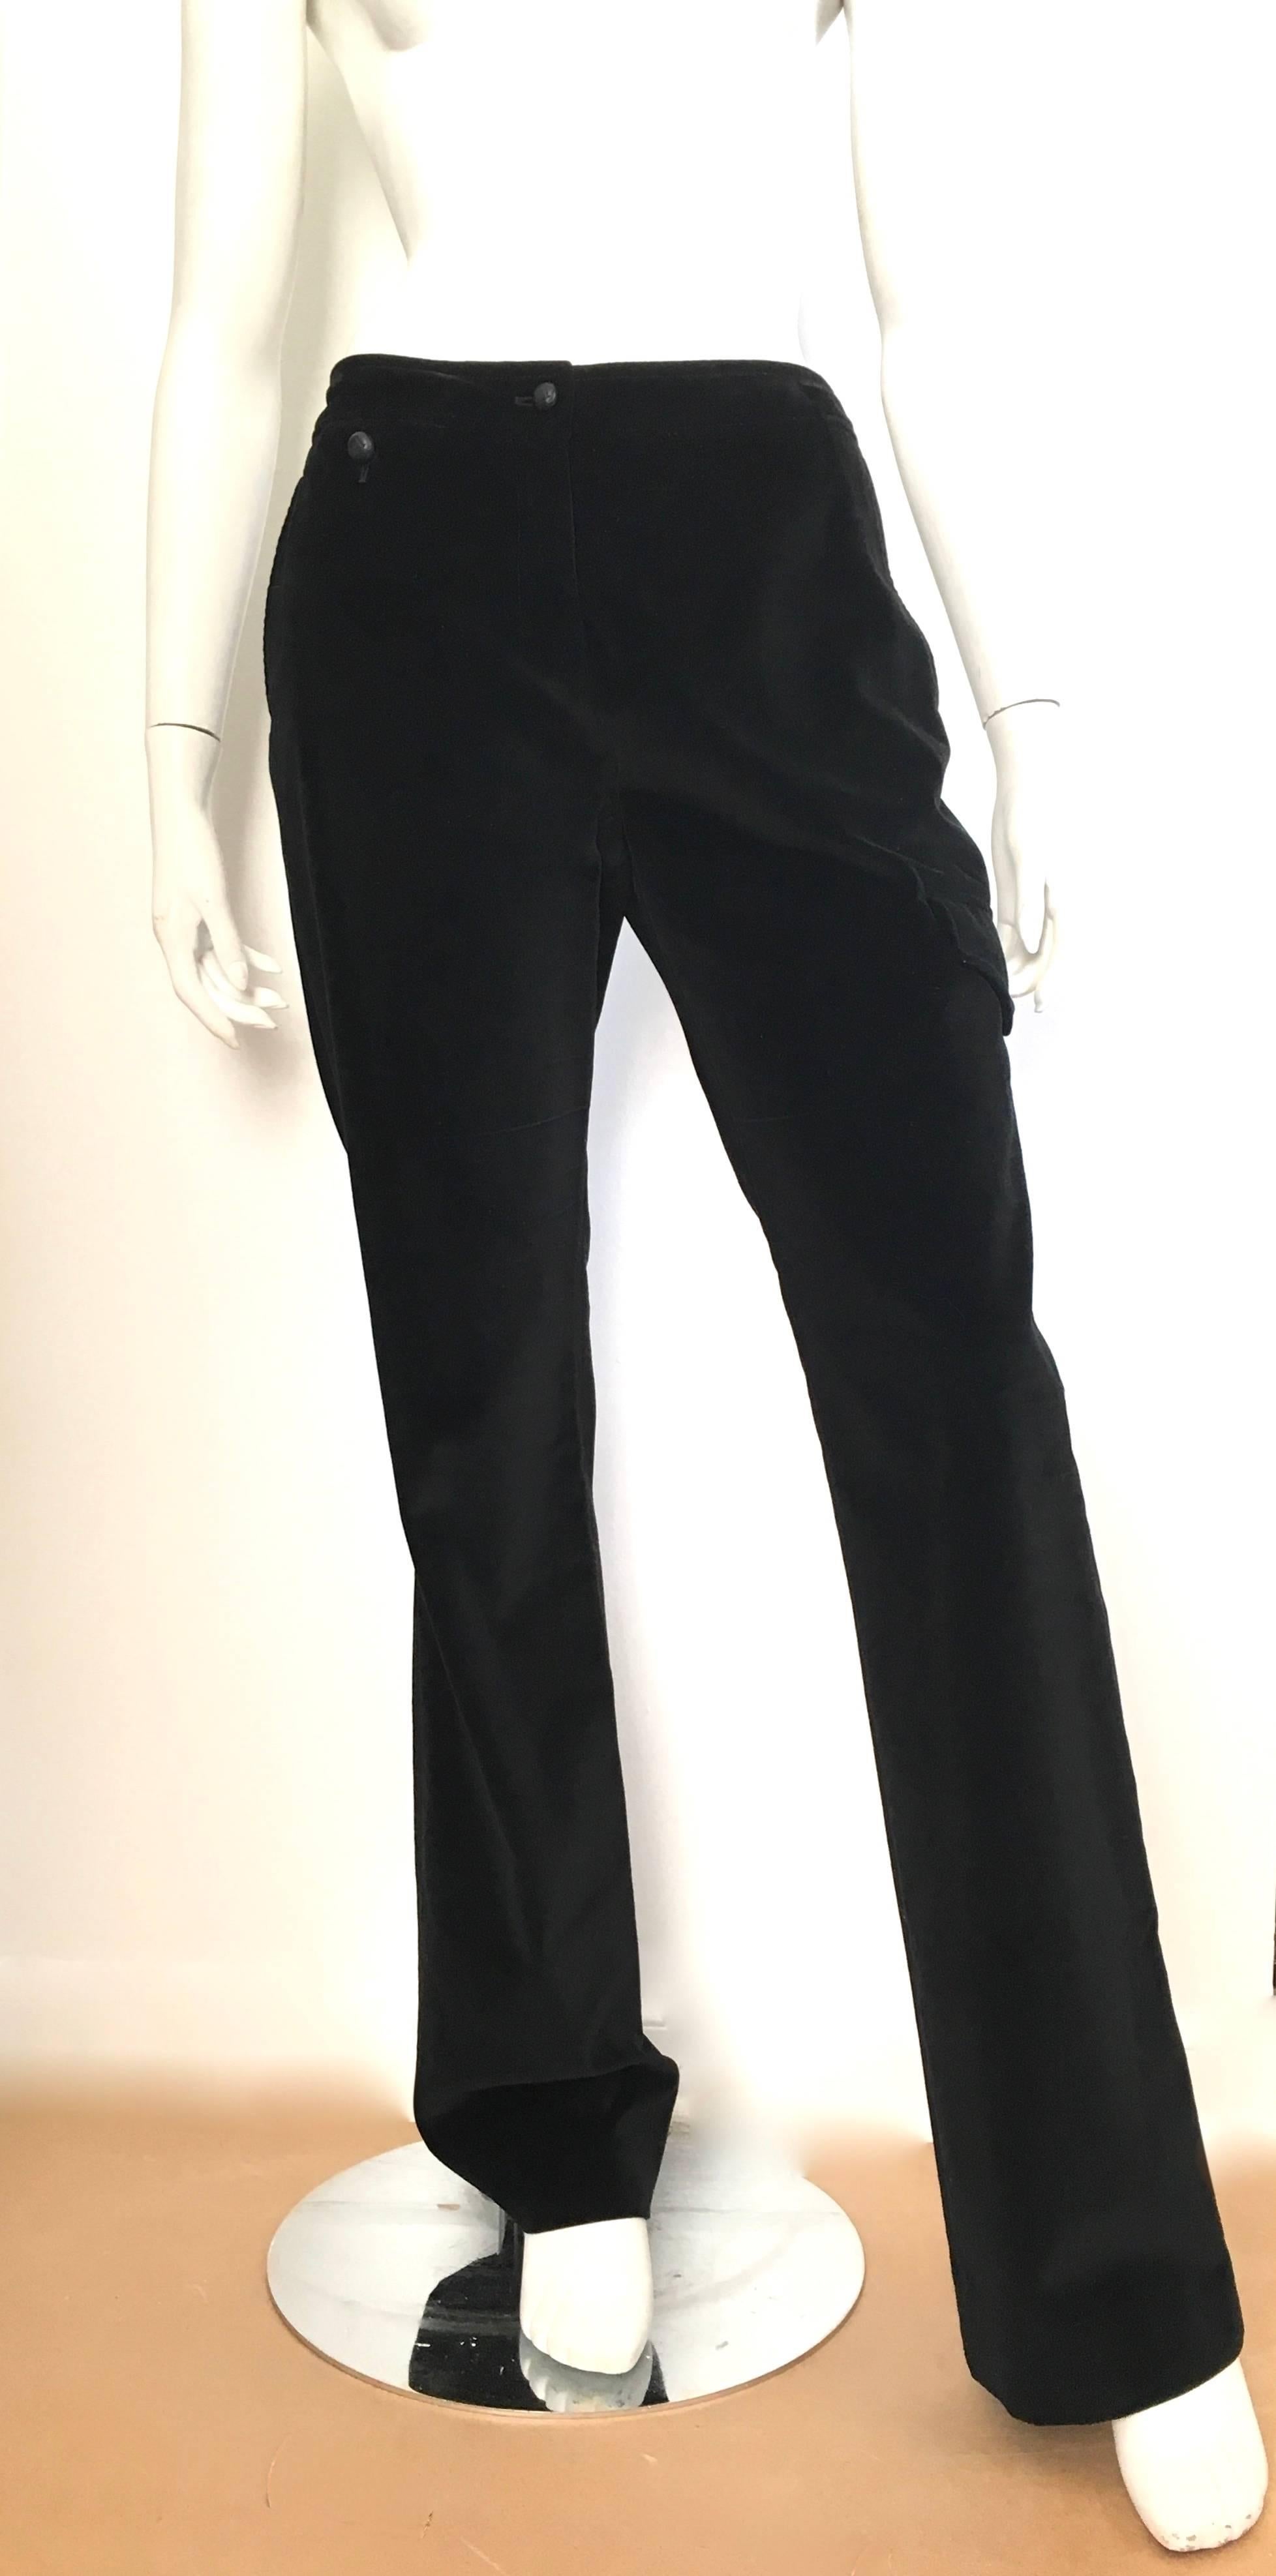 Yves Saint Laurent Rive Gauche black velvet cargo pants with pockets is a French size 38 and will fit an USA size 6.  Gorgeous contemporary velvet cargo pants with black leather buttons. These pants are not lined.  Wear your vintage YSL tuxedo